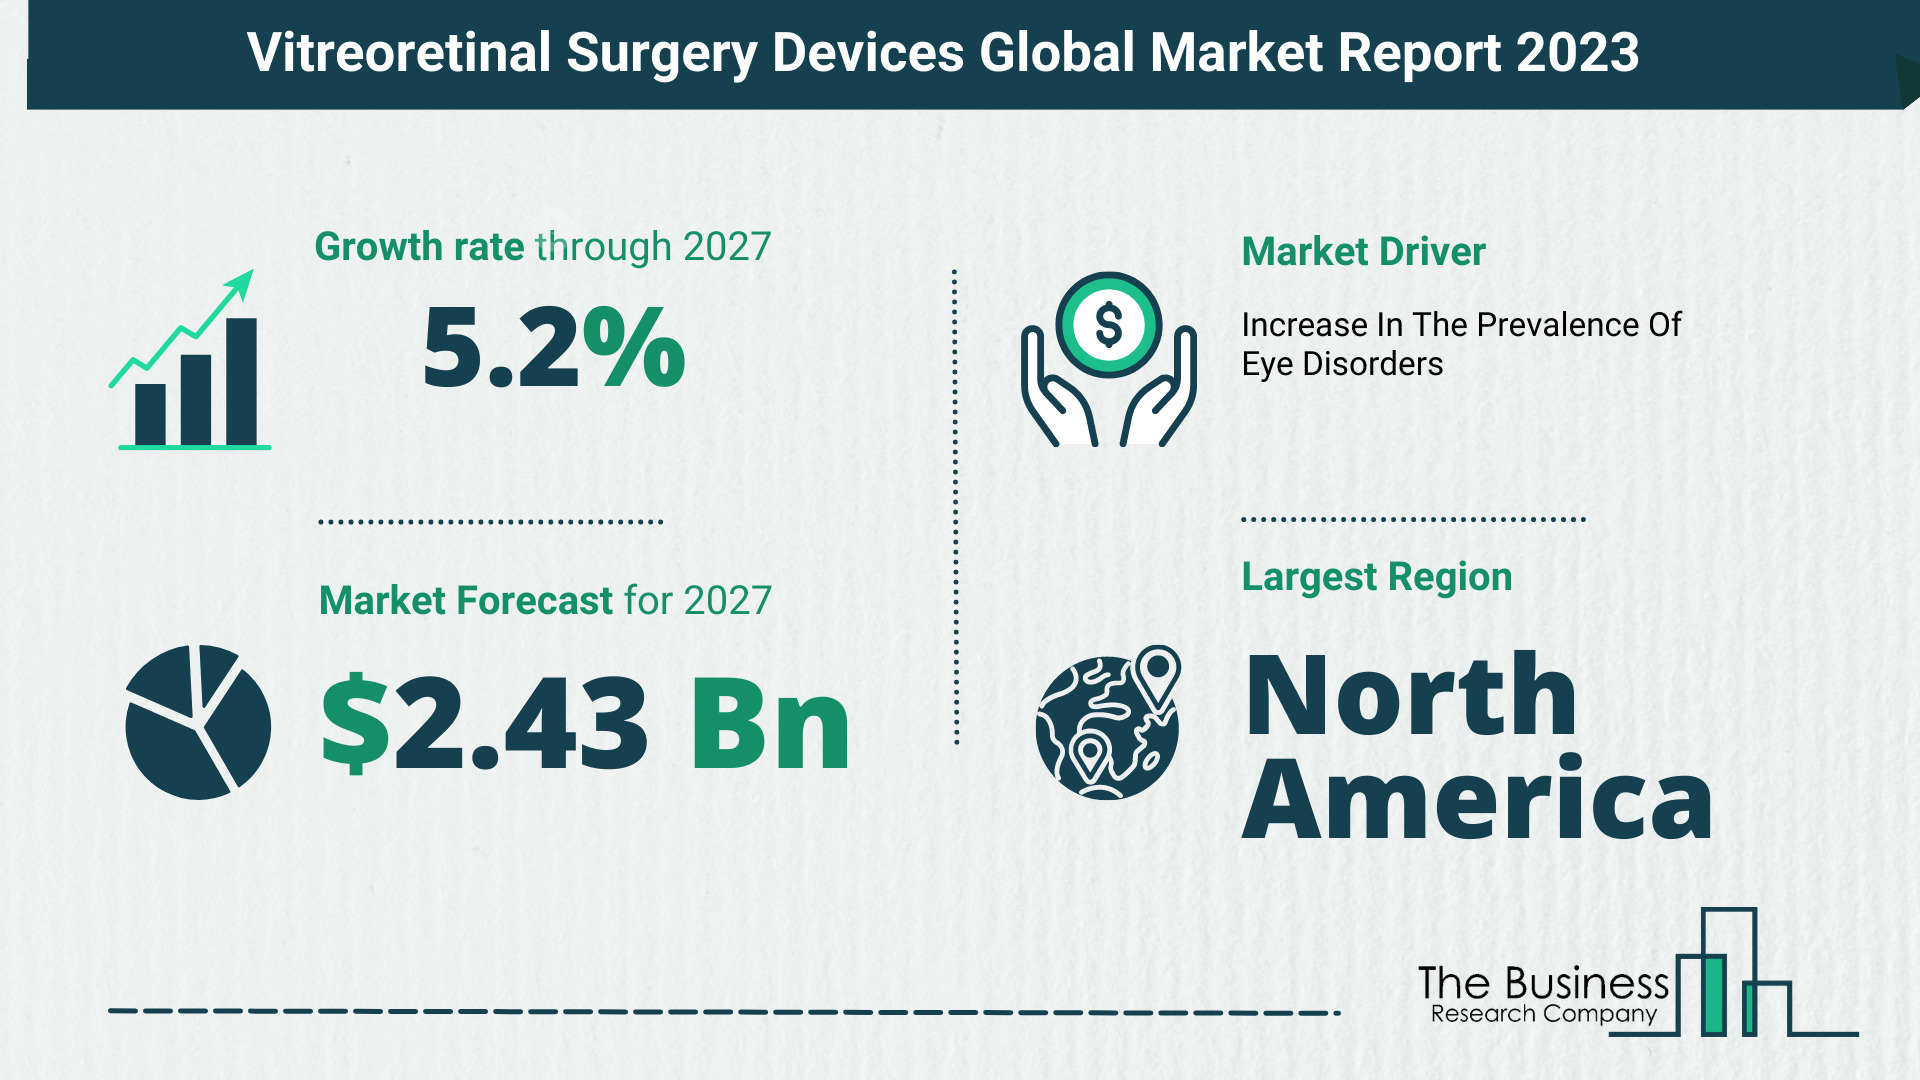 Global Vitreoretinal Surgery Devices Market